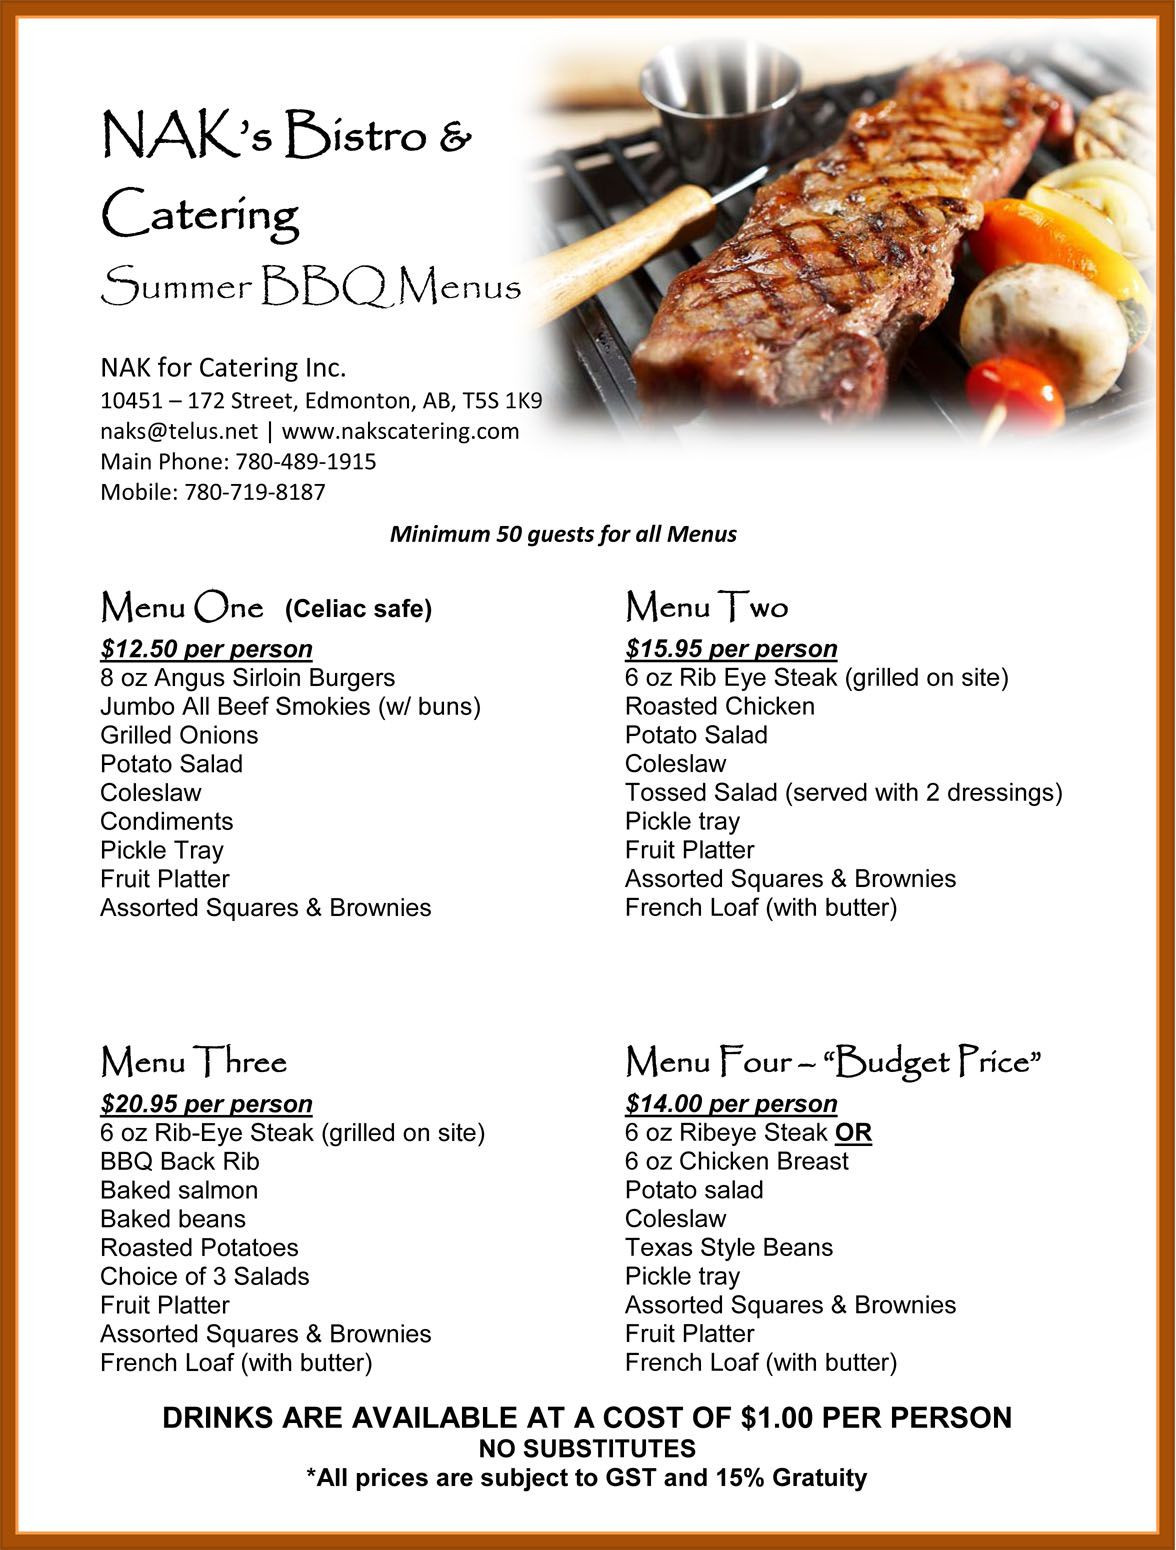 Dinner Party For 4 Menu Ideas
 Barbecue Rehearsal Dinner Summer BBQ Catering Menu Great